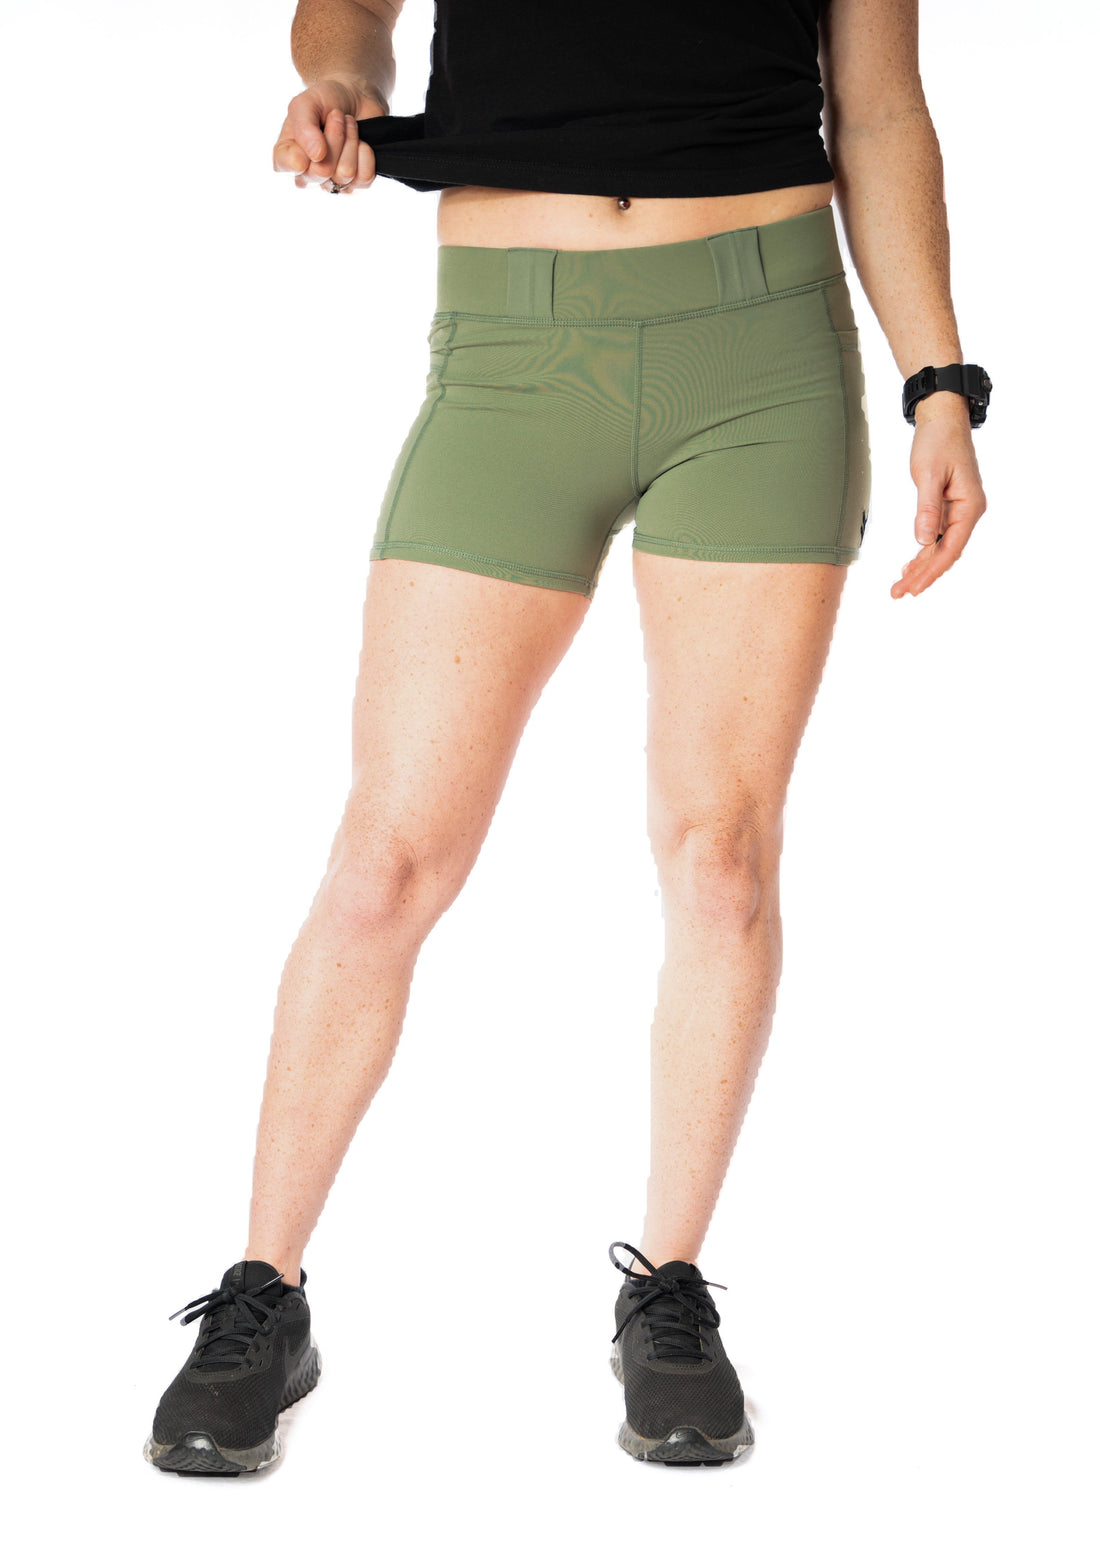 womens olive green conceal carry compression shorts